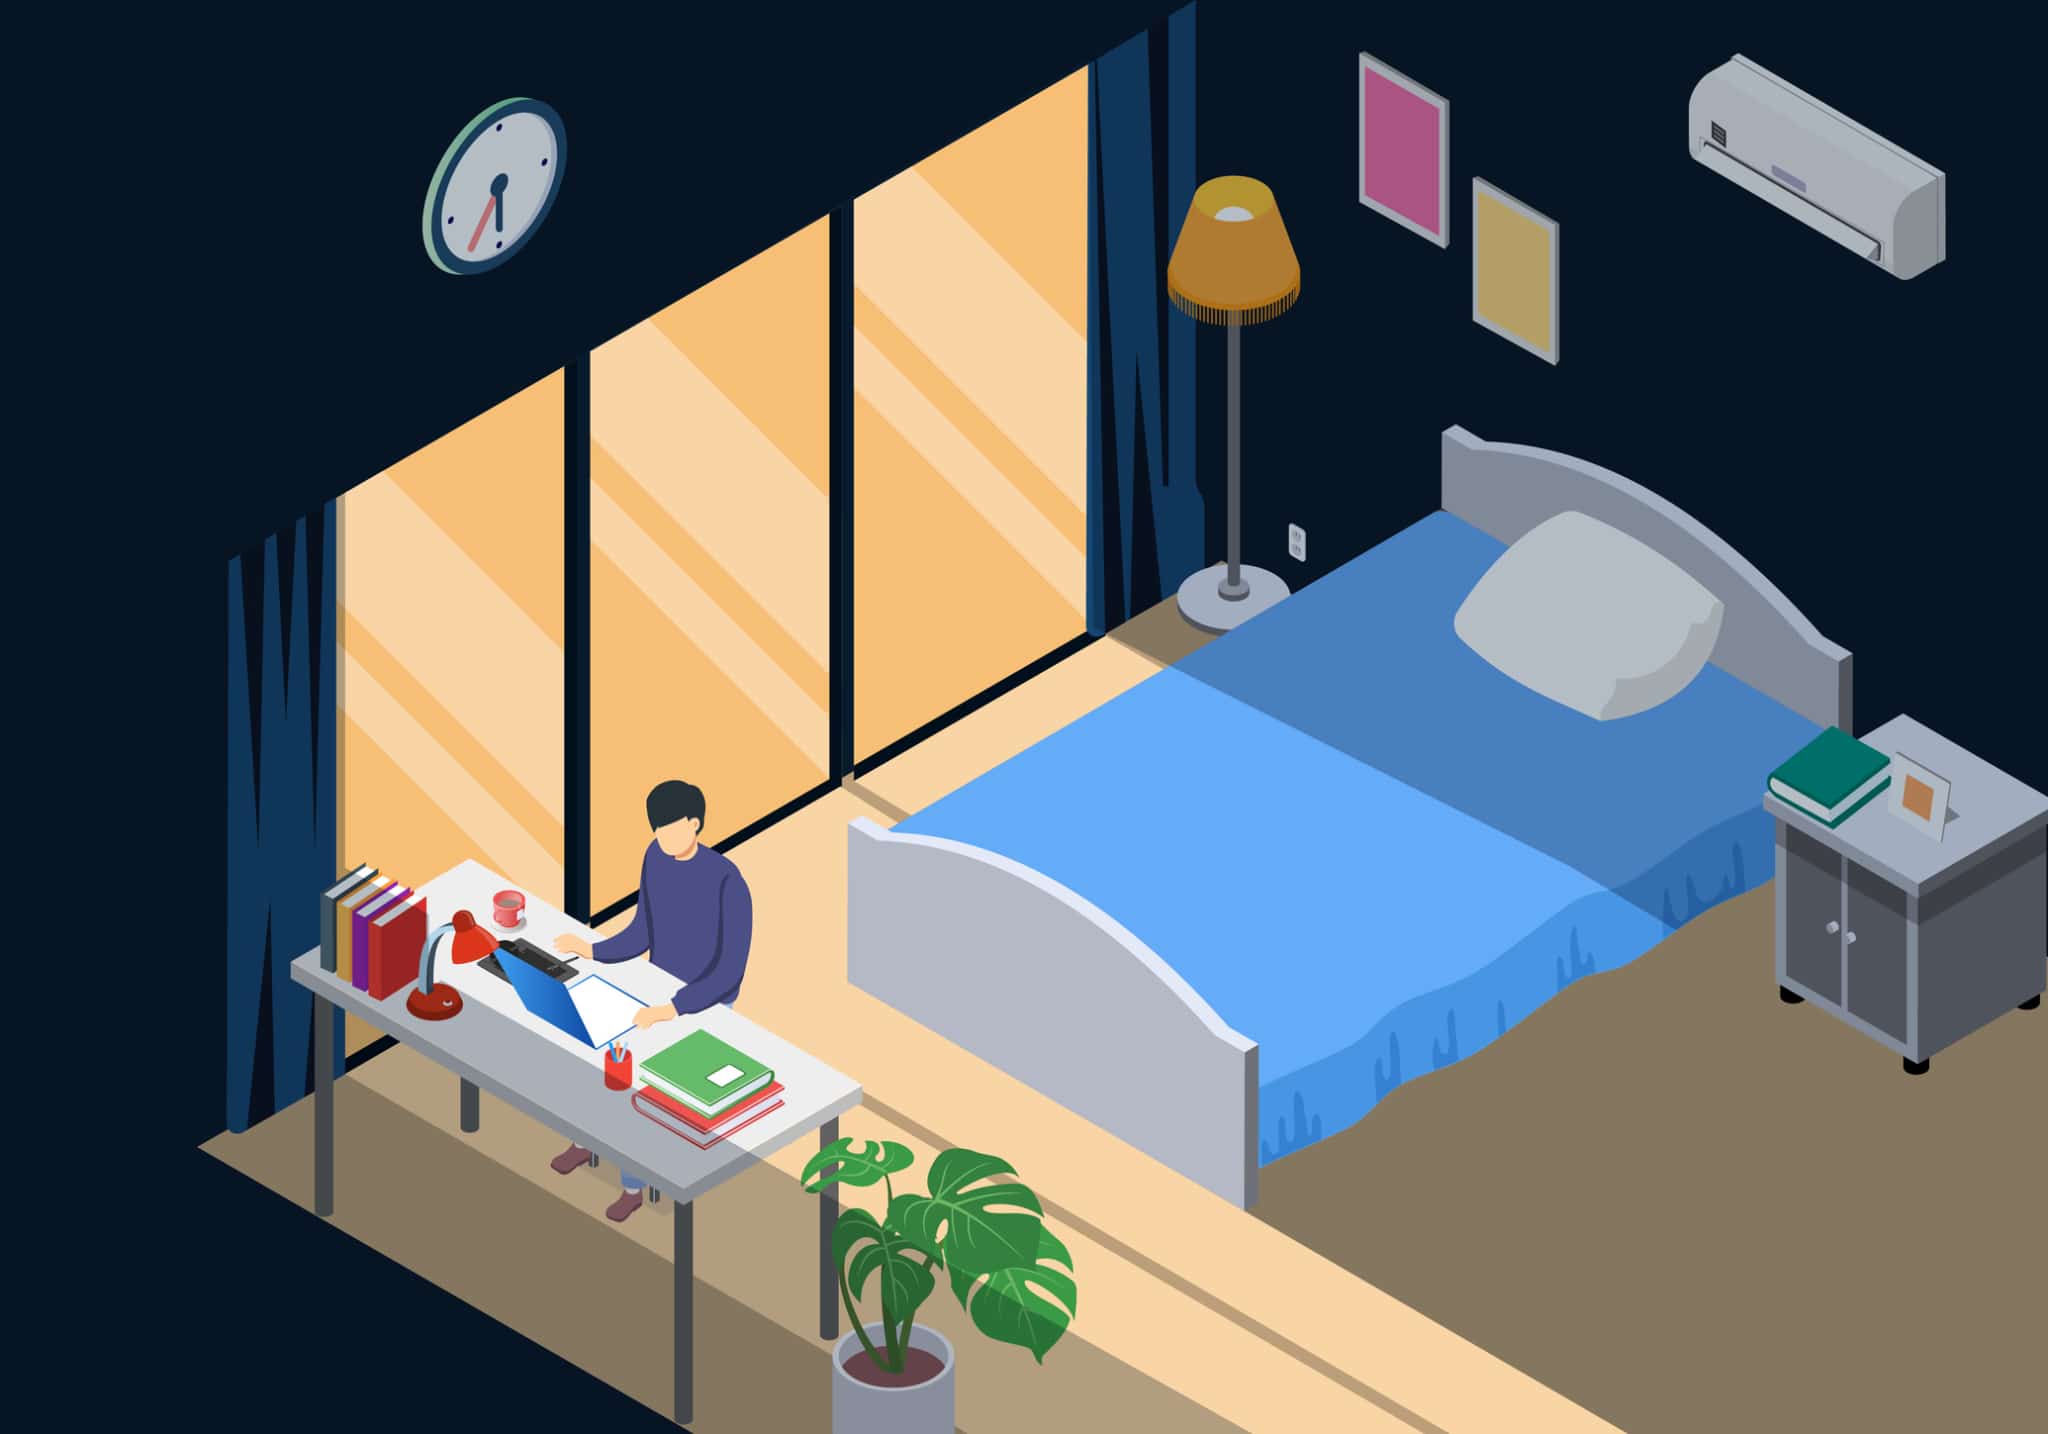 Worker work from home in bedroom in the evening near mirror. Isometric room interior and character using laptop. Stay at home.